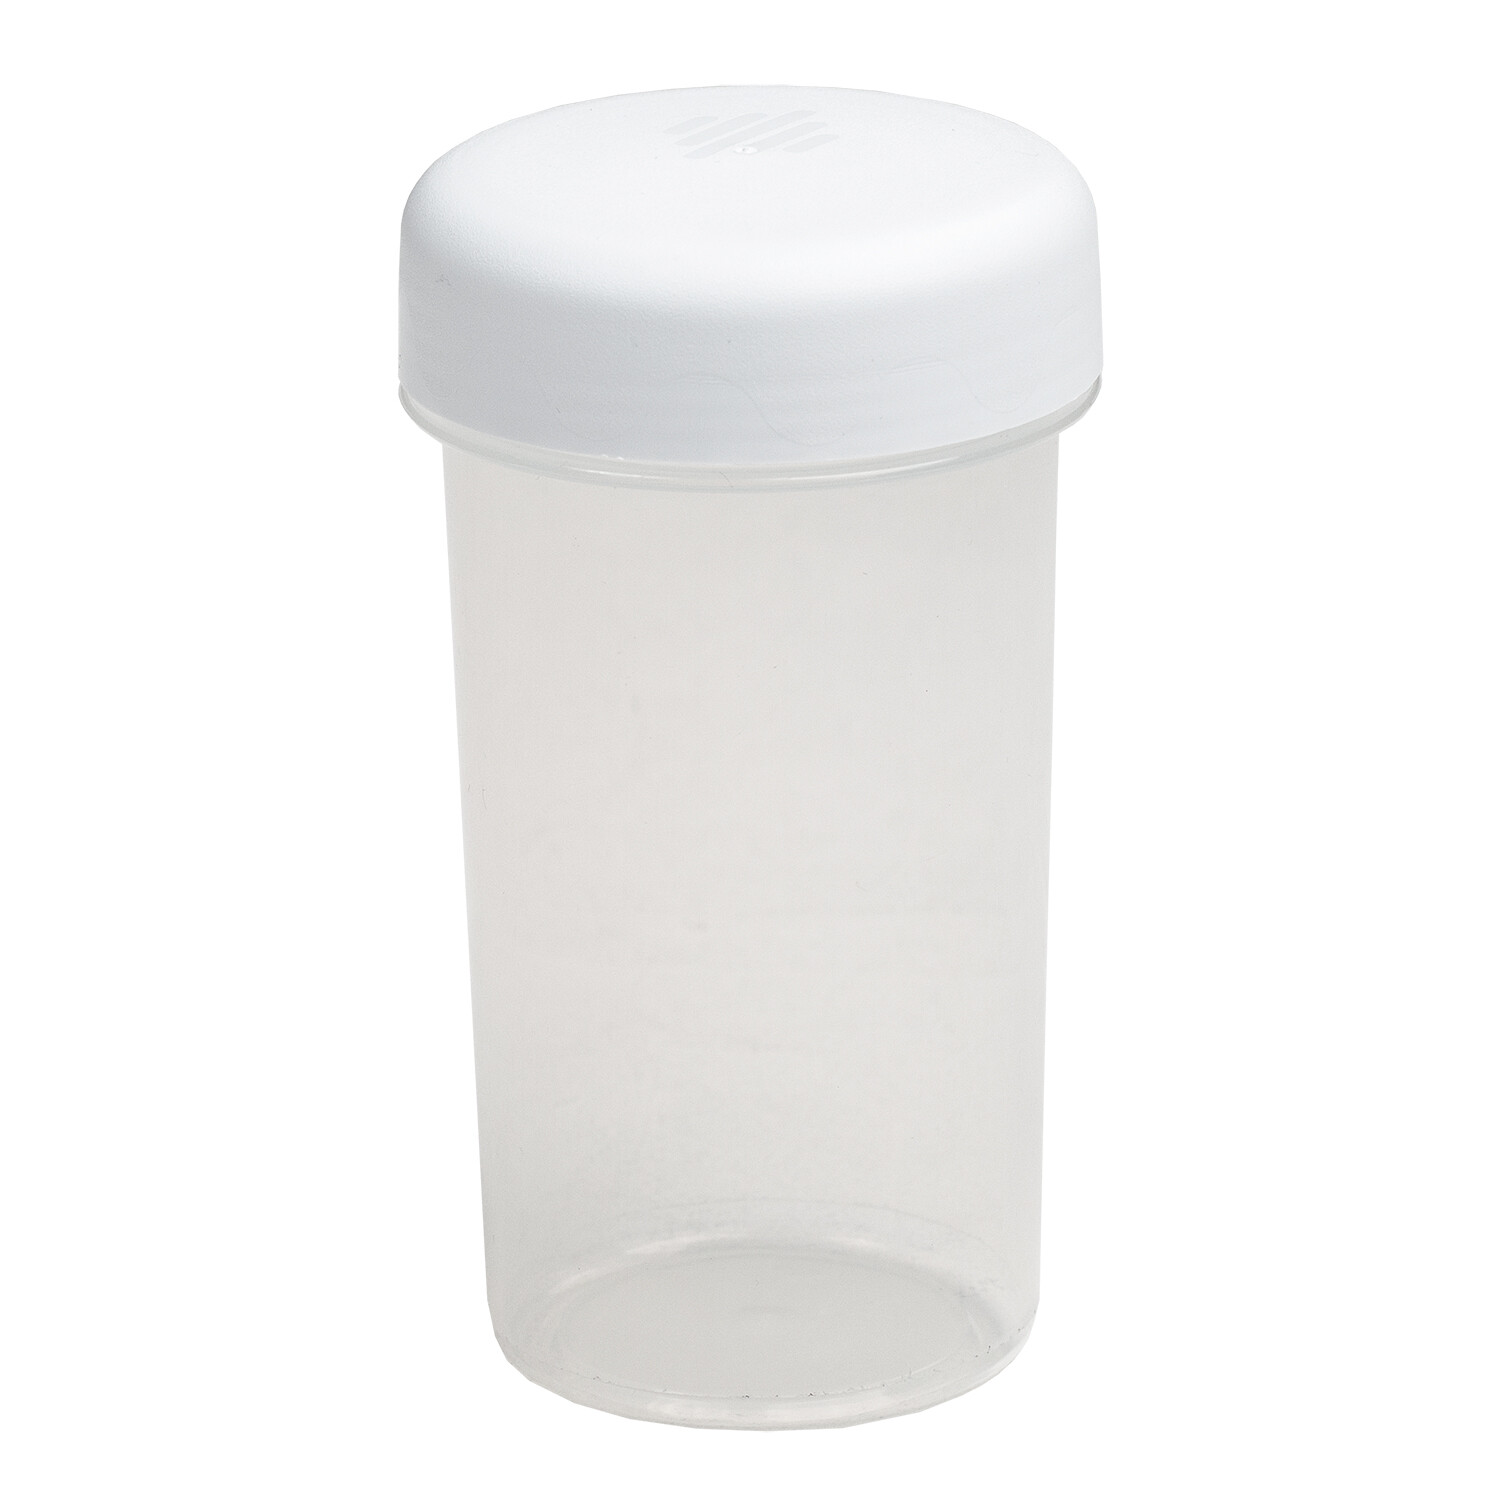 Wham Food Container with Screw Top Lid Image